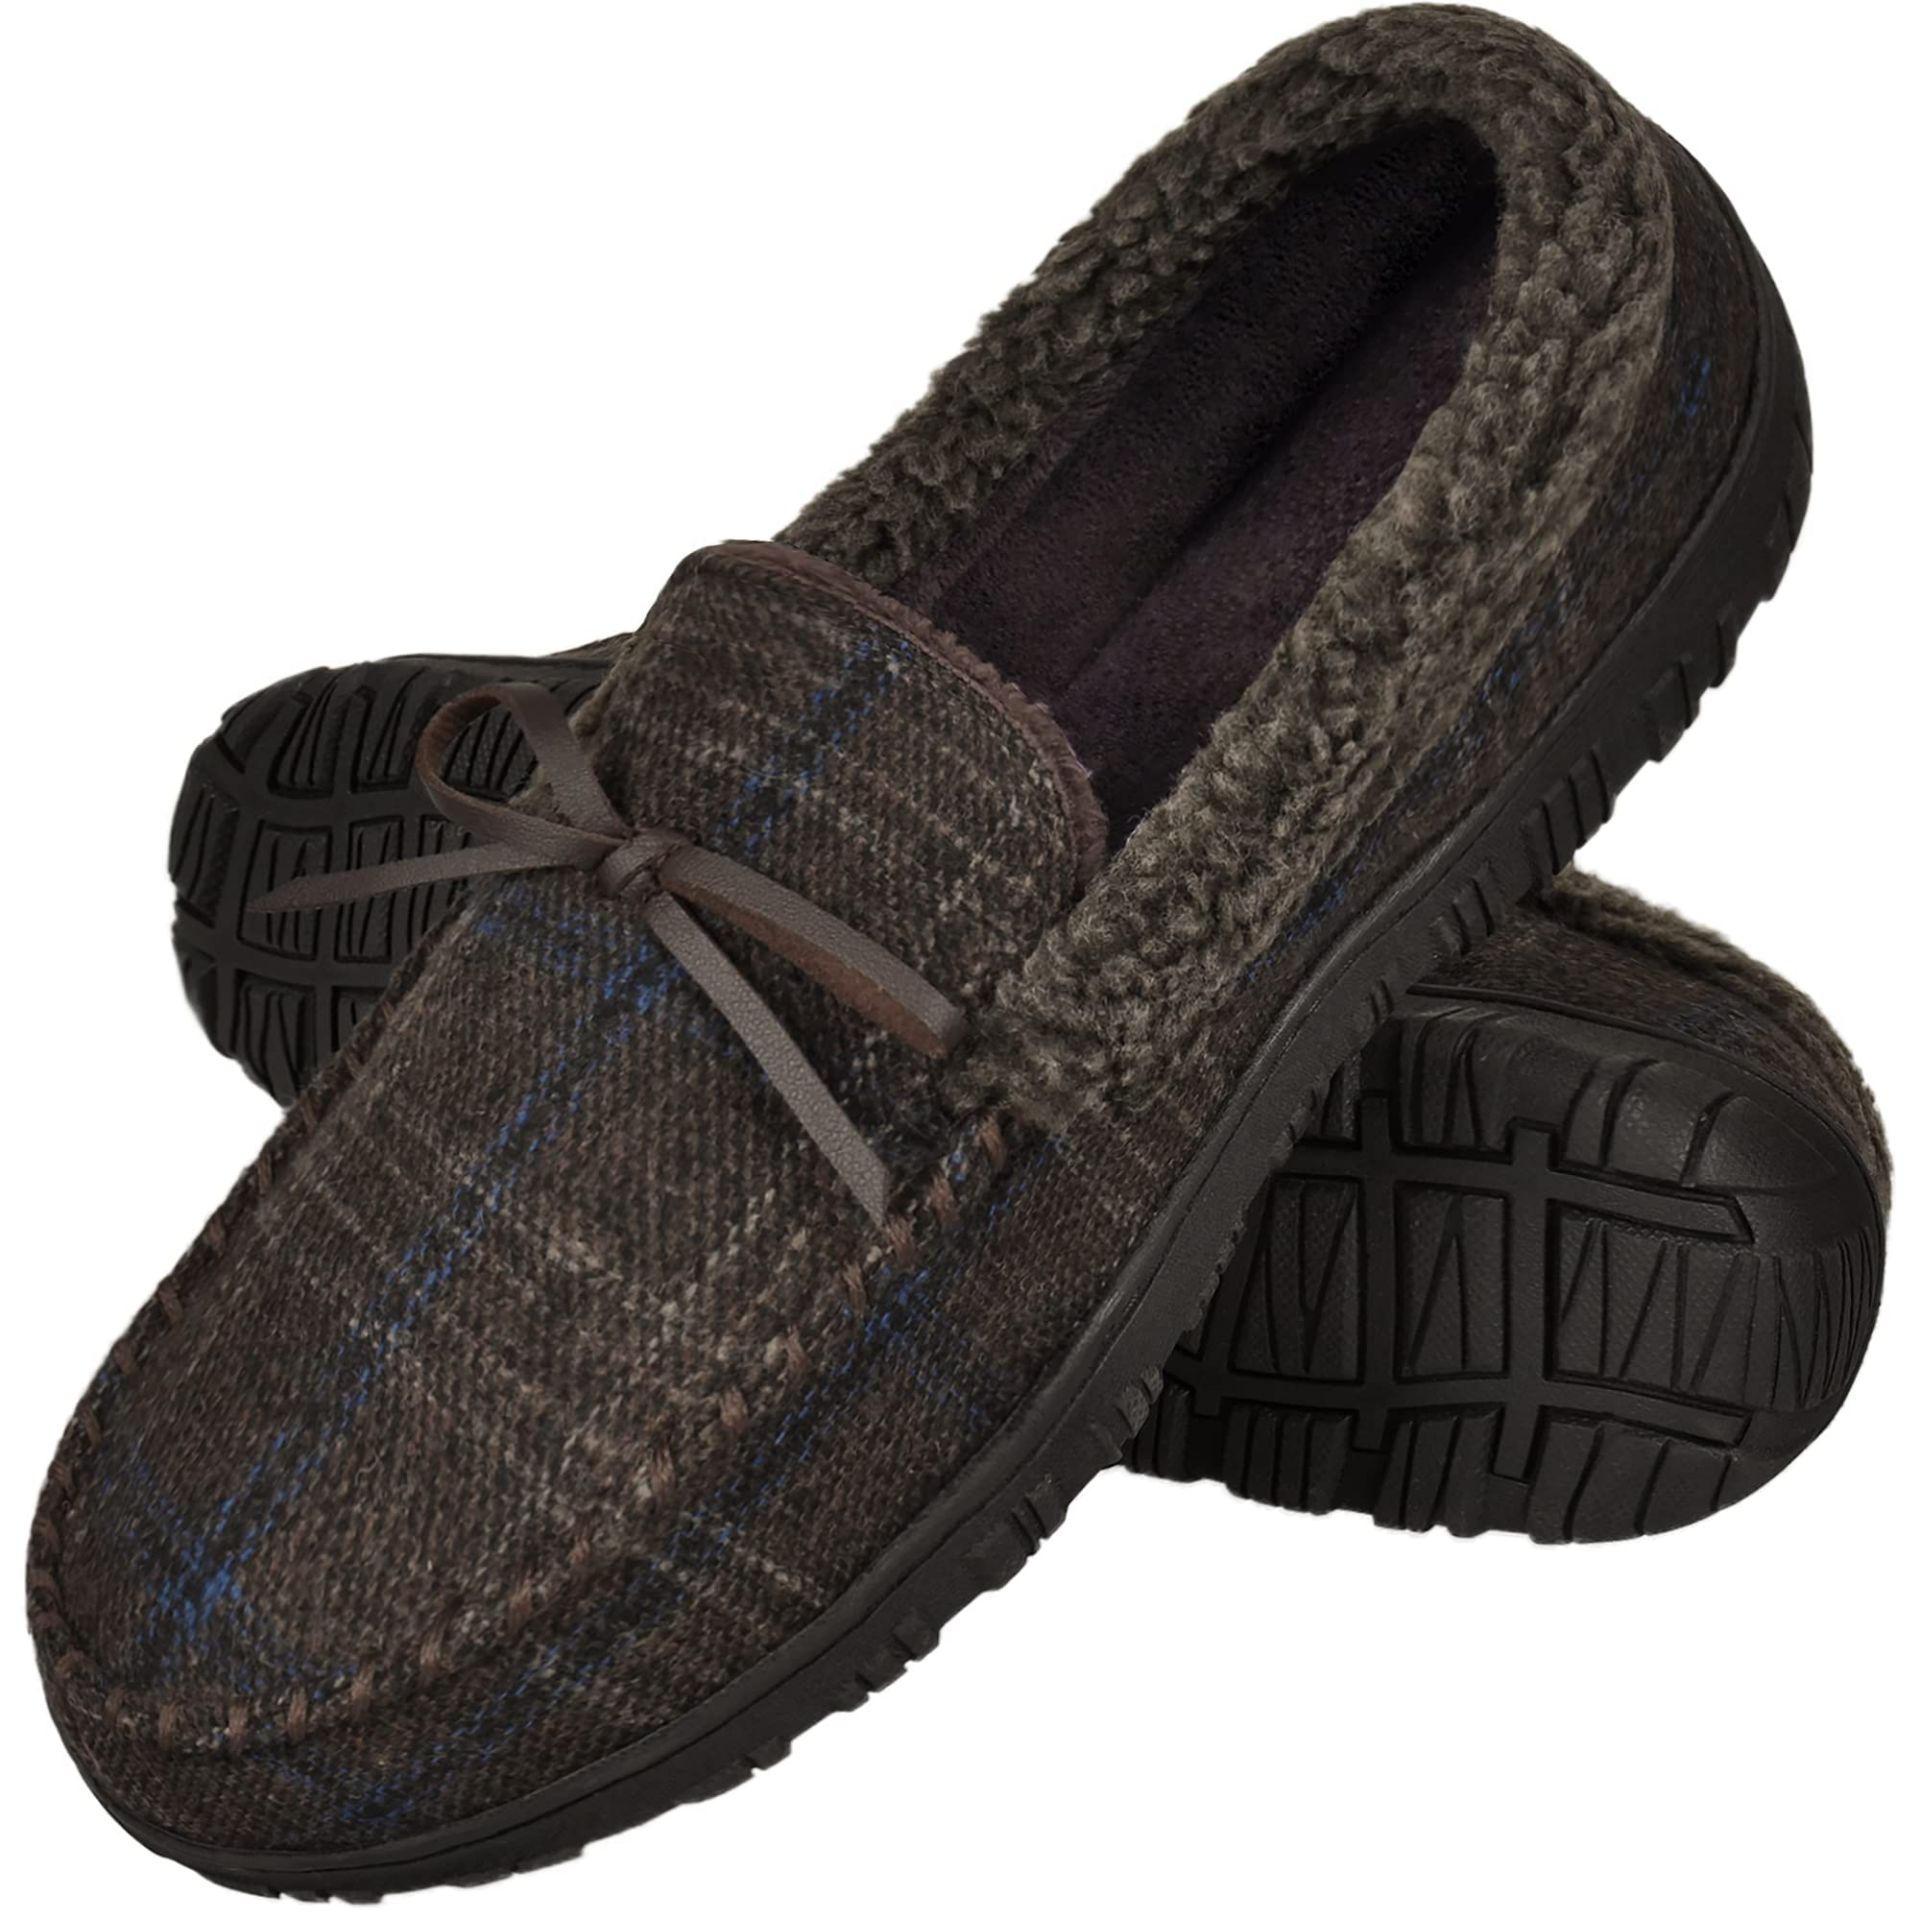 RRP £11.40 MIXIN Slippers for Men Warm Moccasin House Slippers